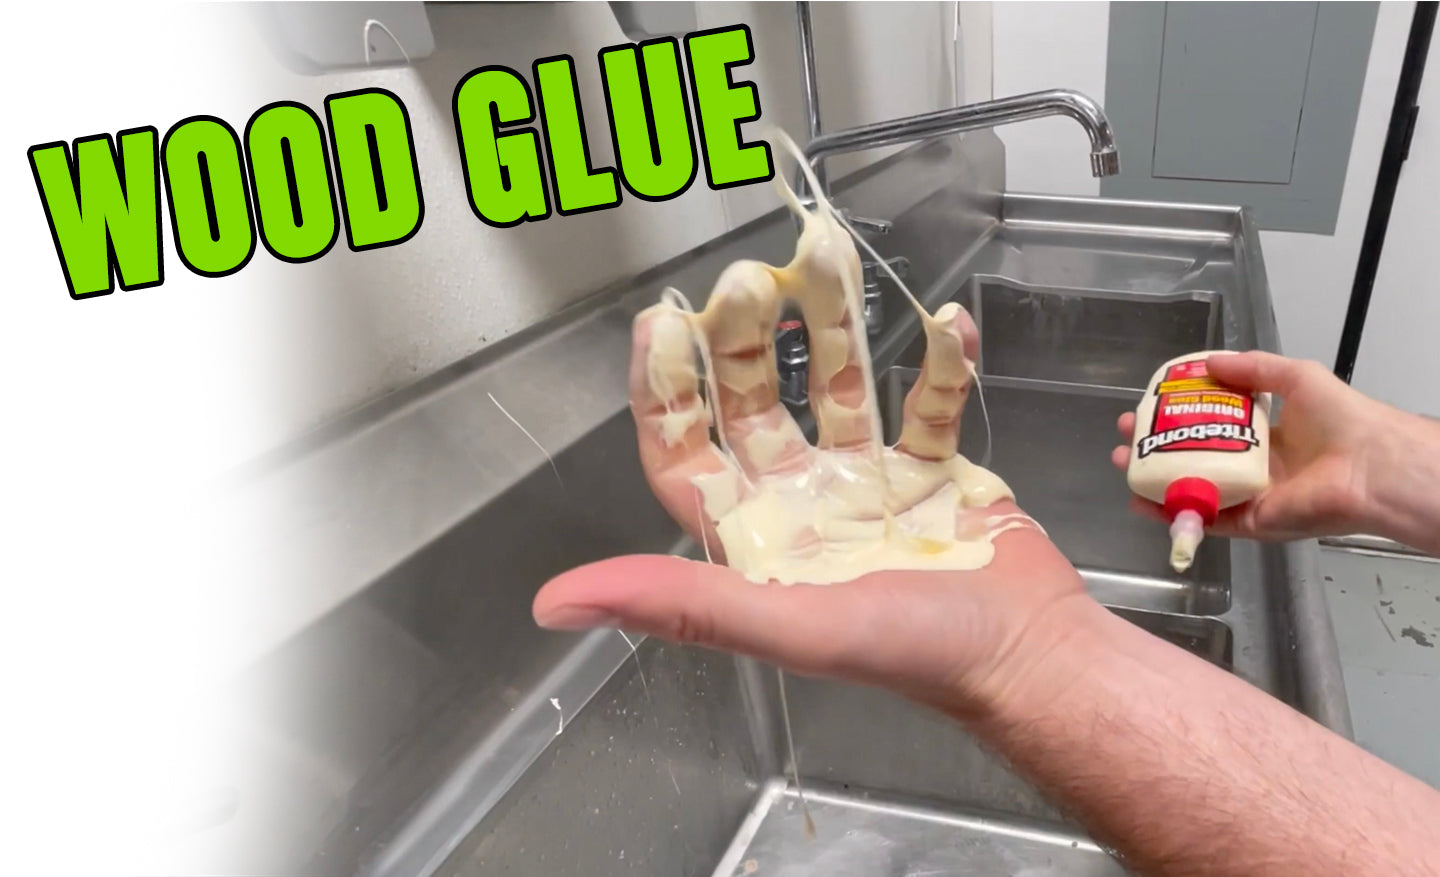 How To Remove Wood Glue From Skin and Hands